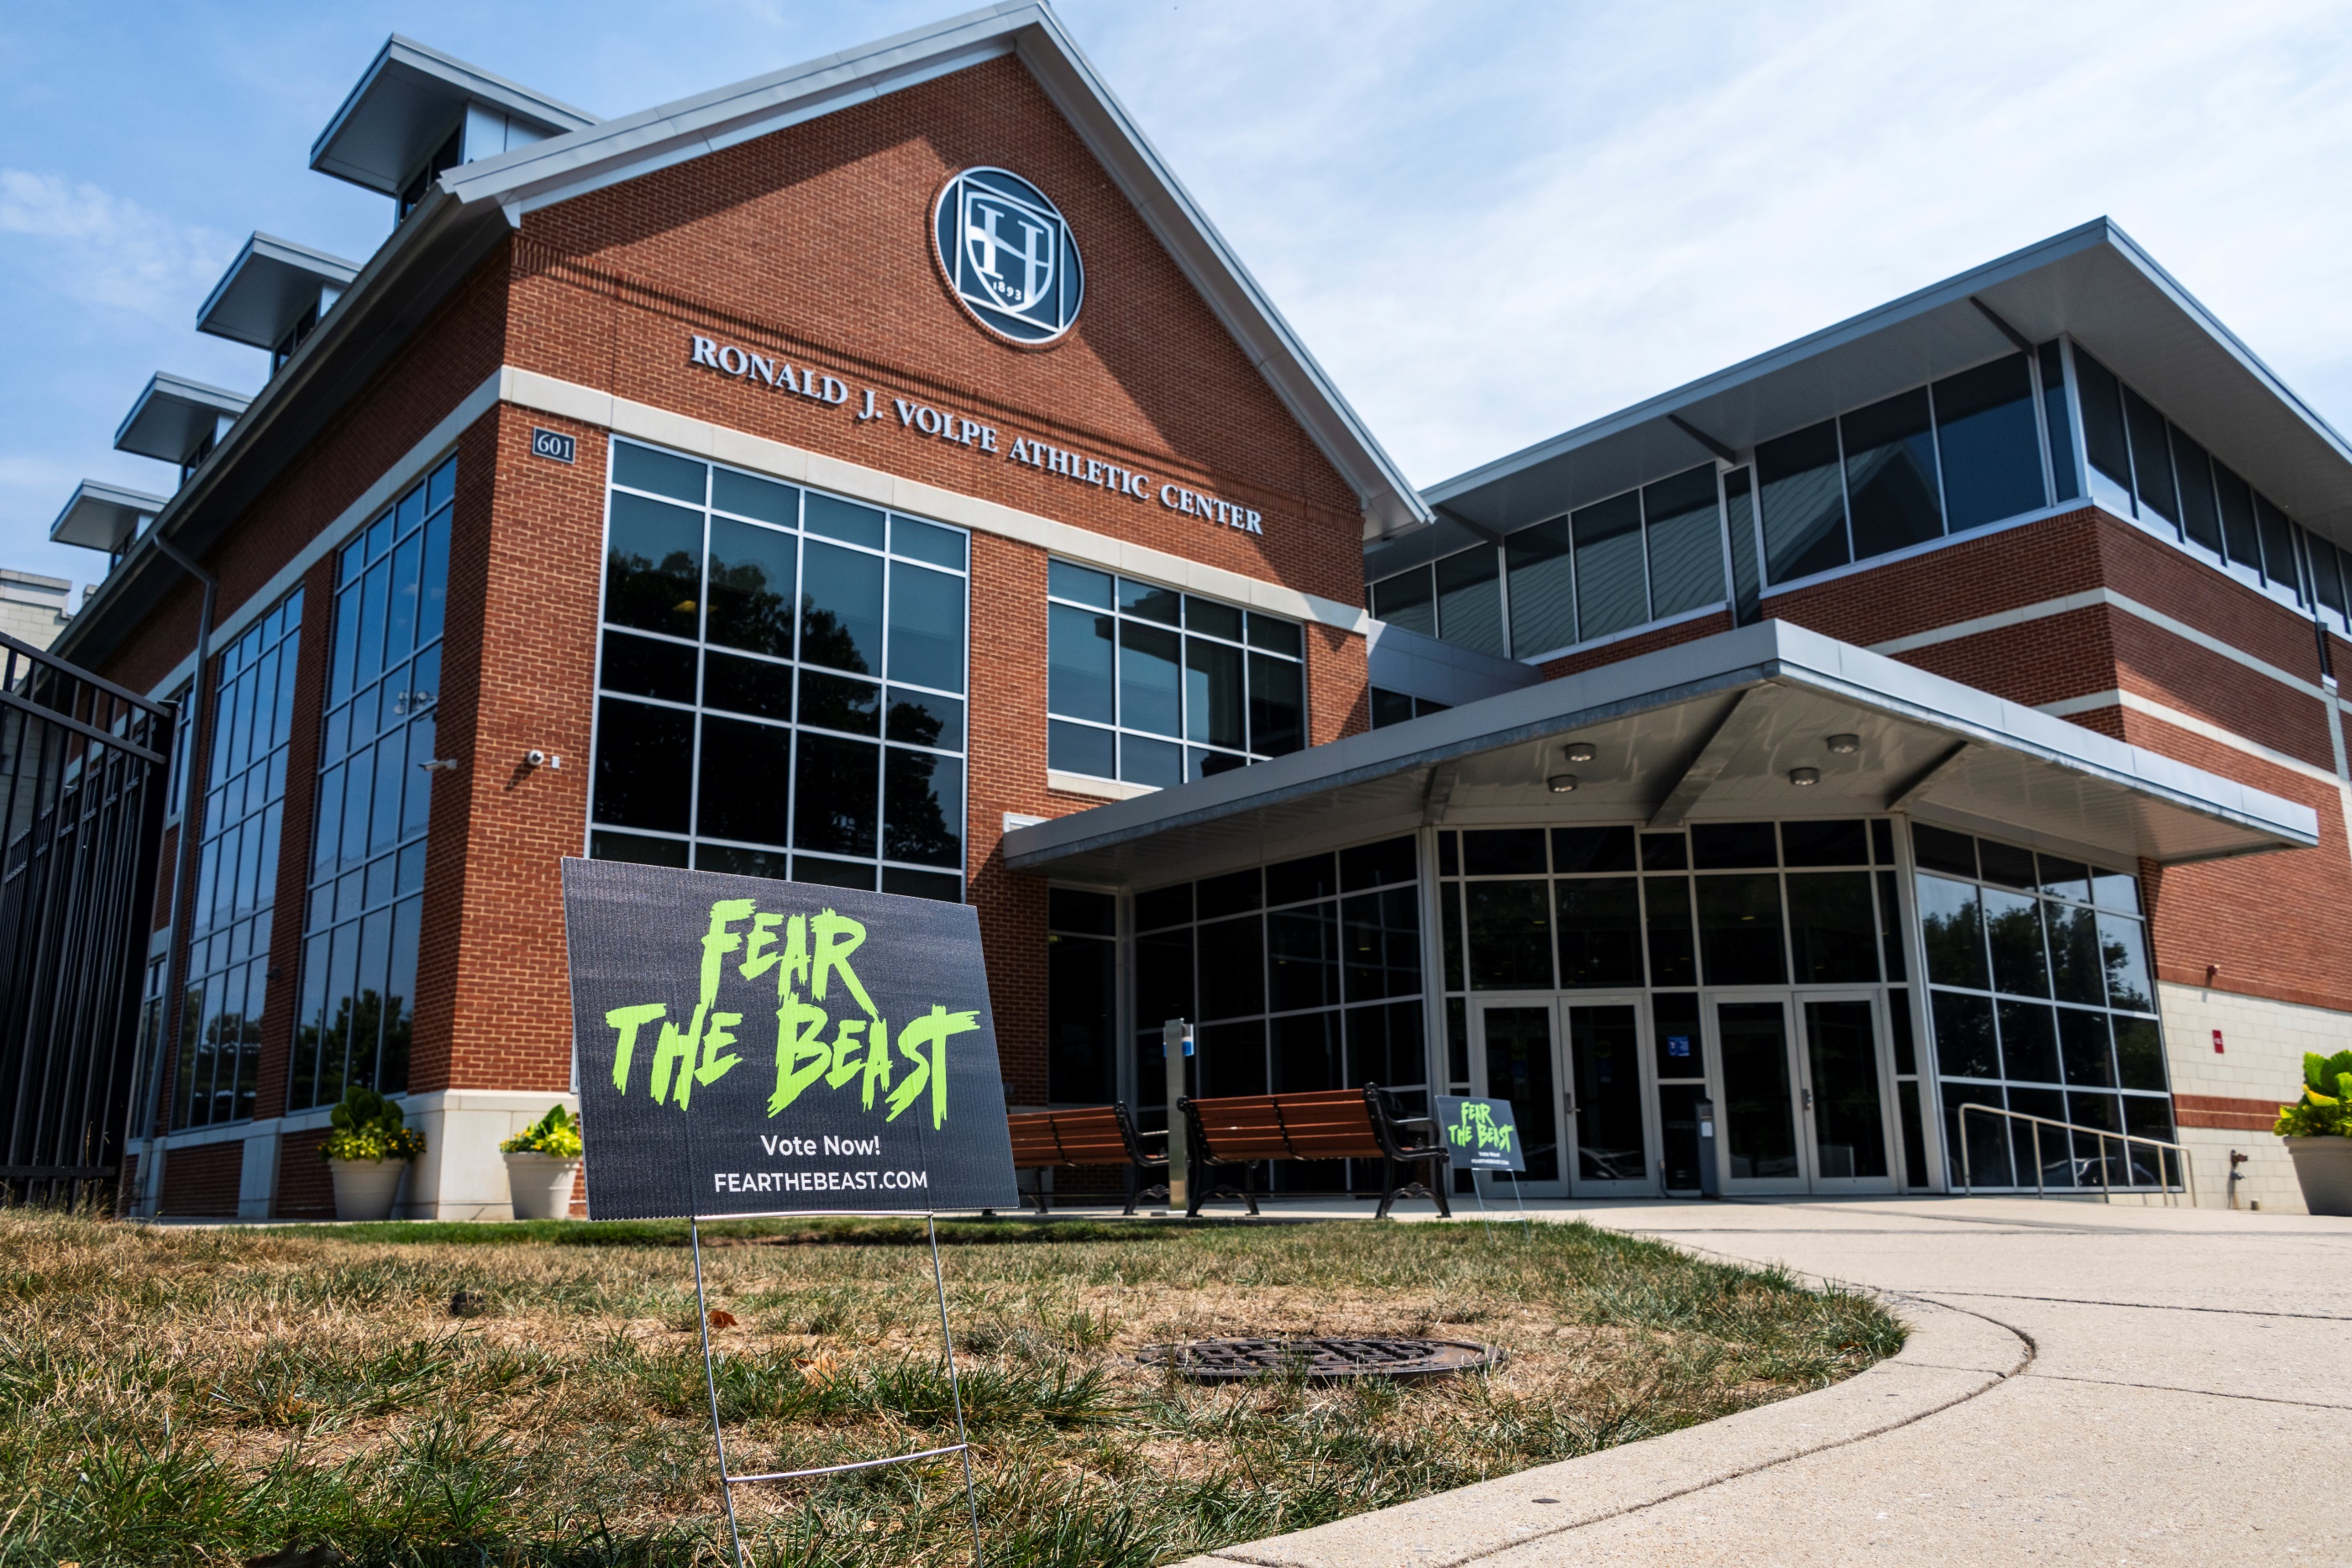 A "Fear The Beast" sign sits outside of the Volpe Athletic Center, home of the newly established Frederick TBL franchise